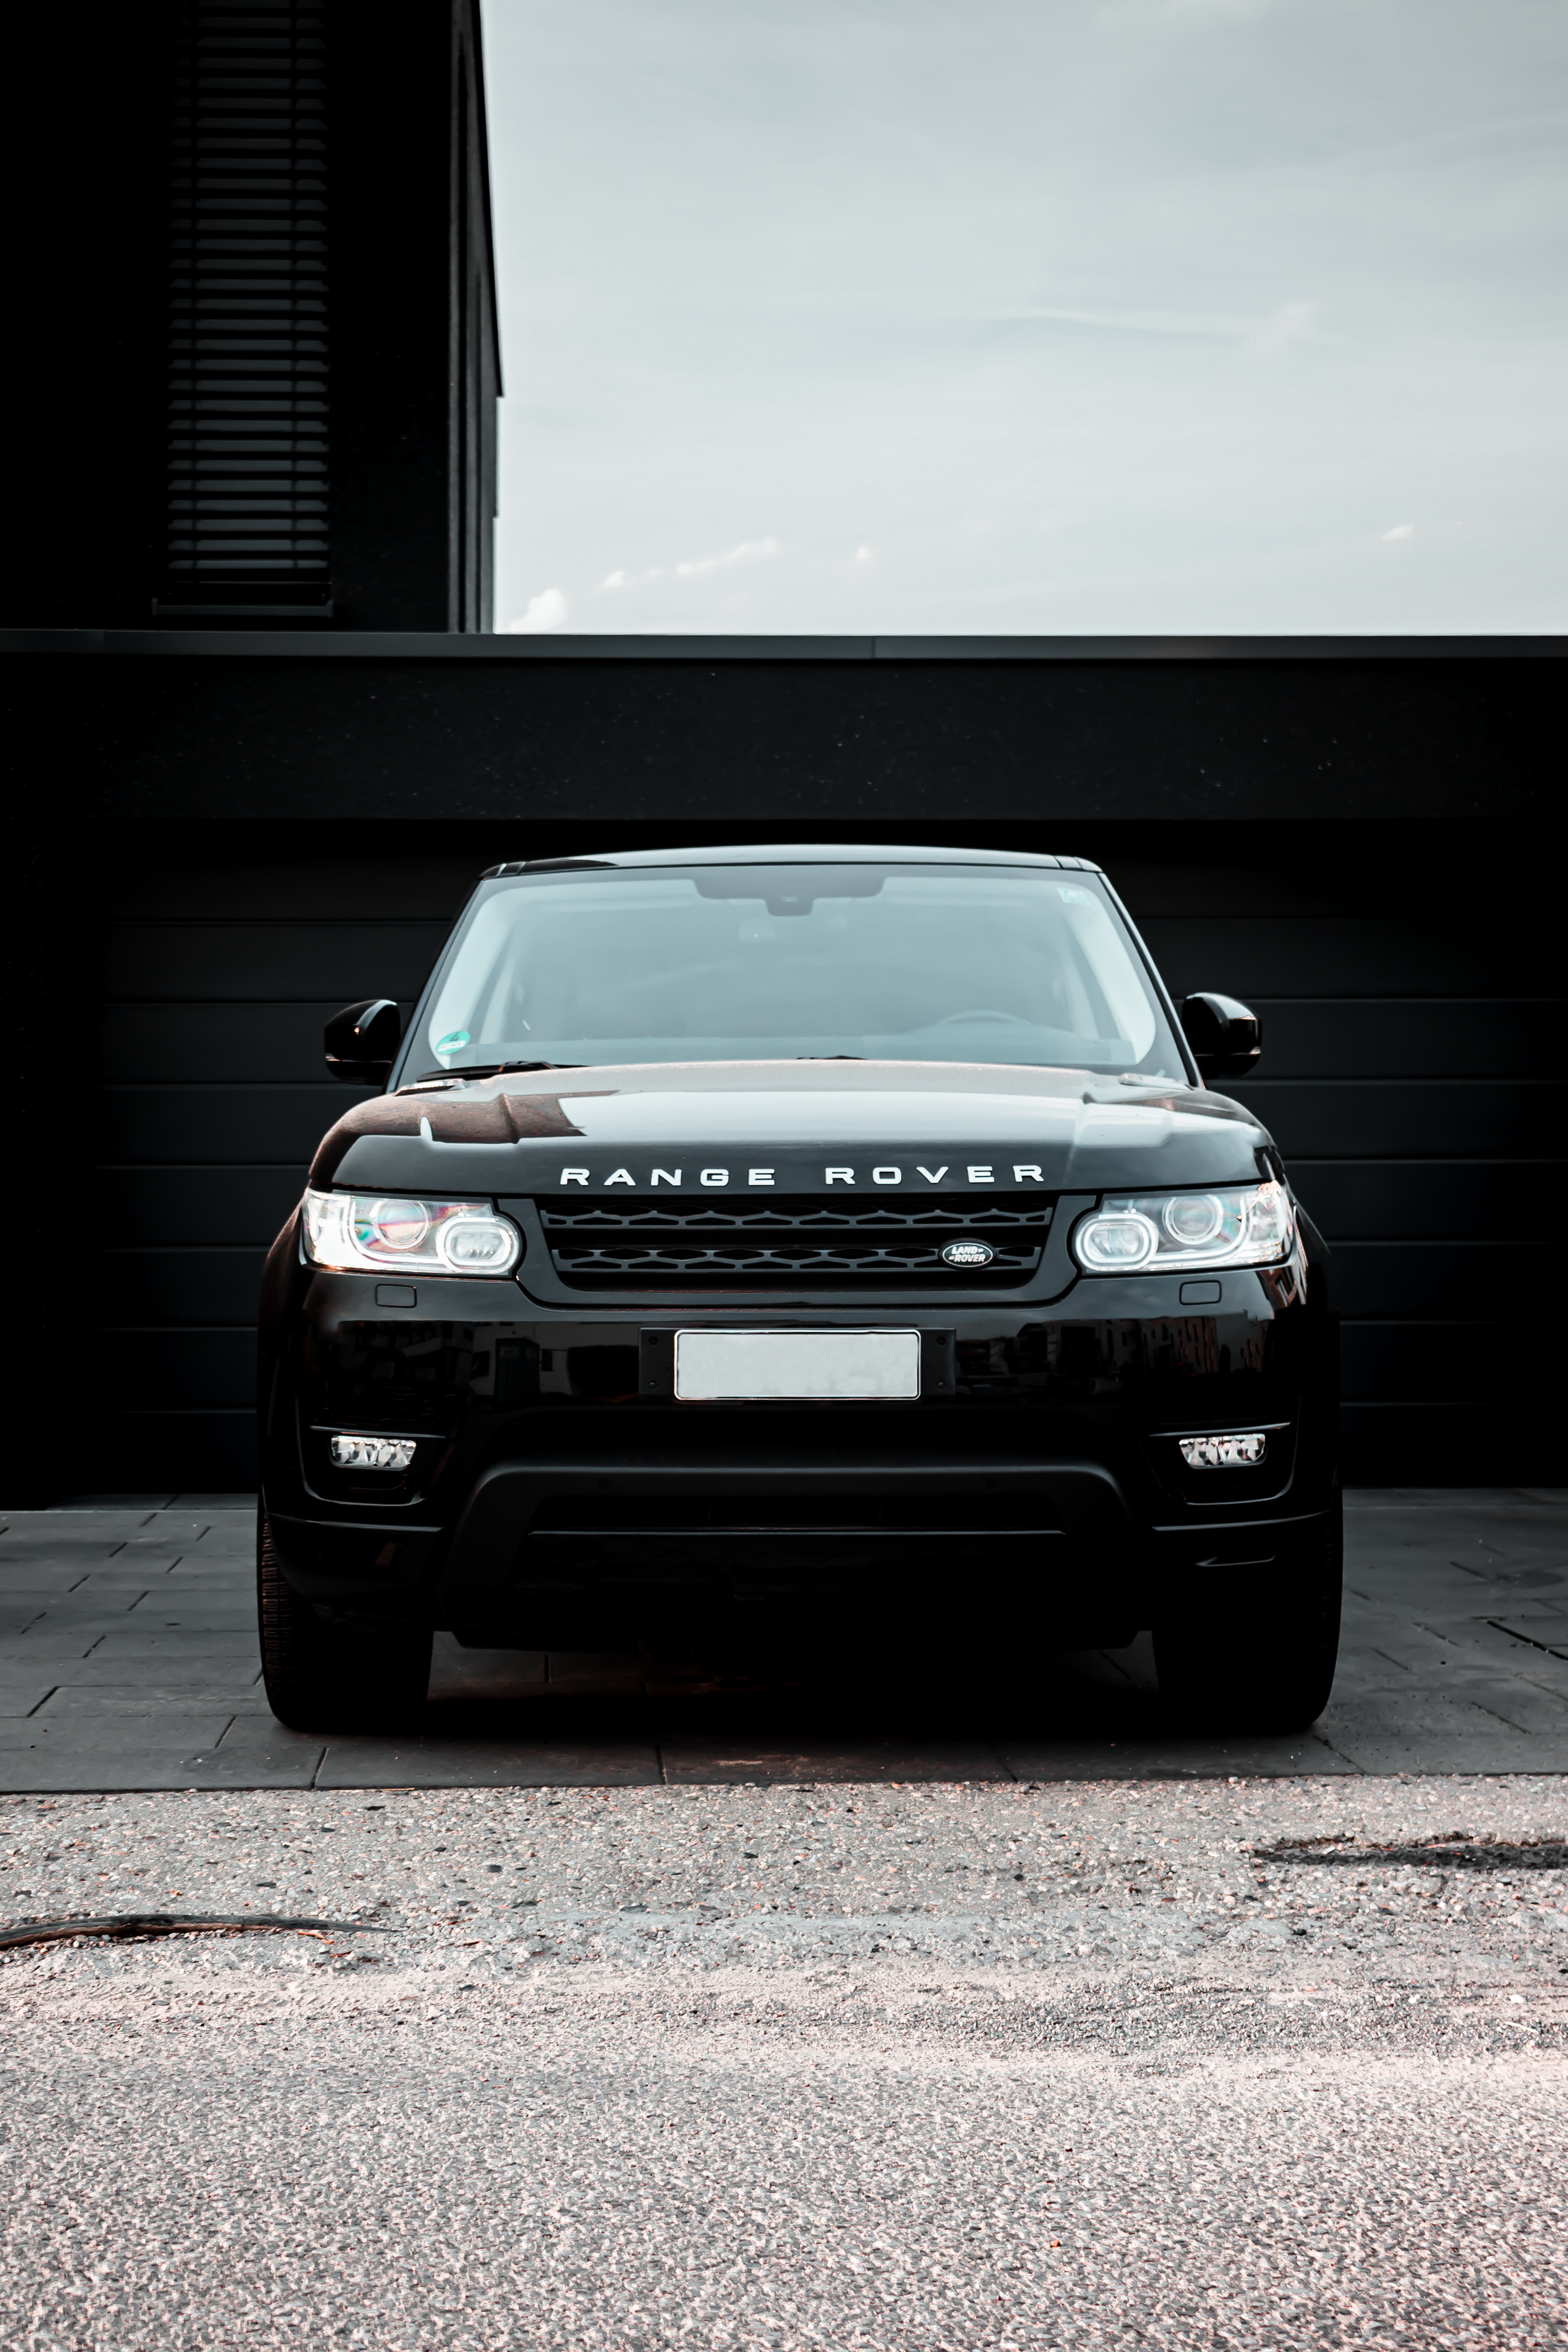 range rover, land rover, front view, suv, cars, black, car, machine